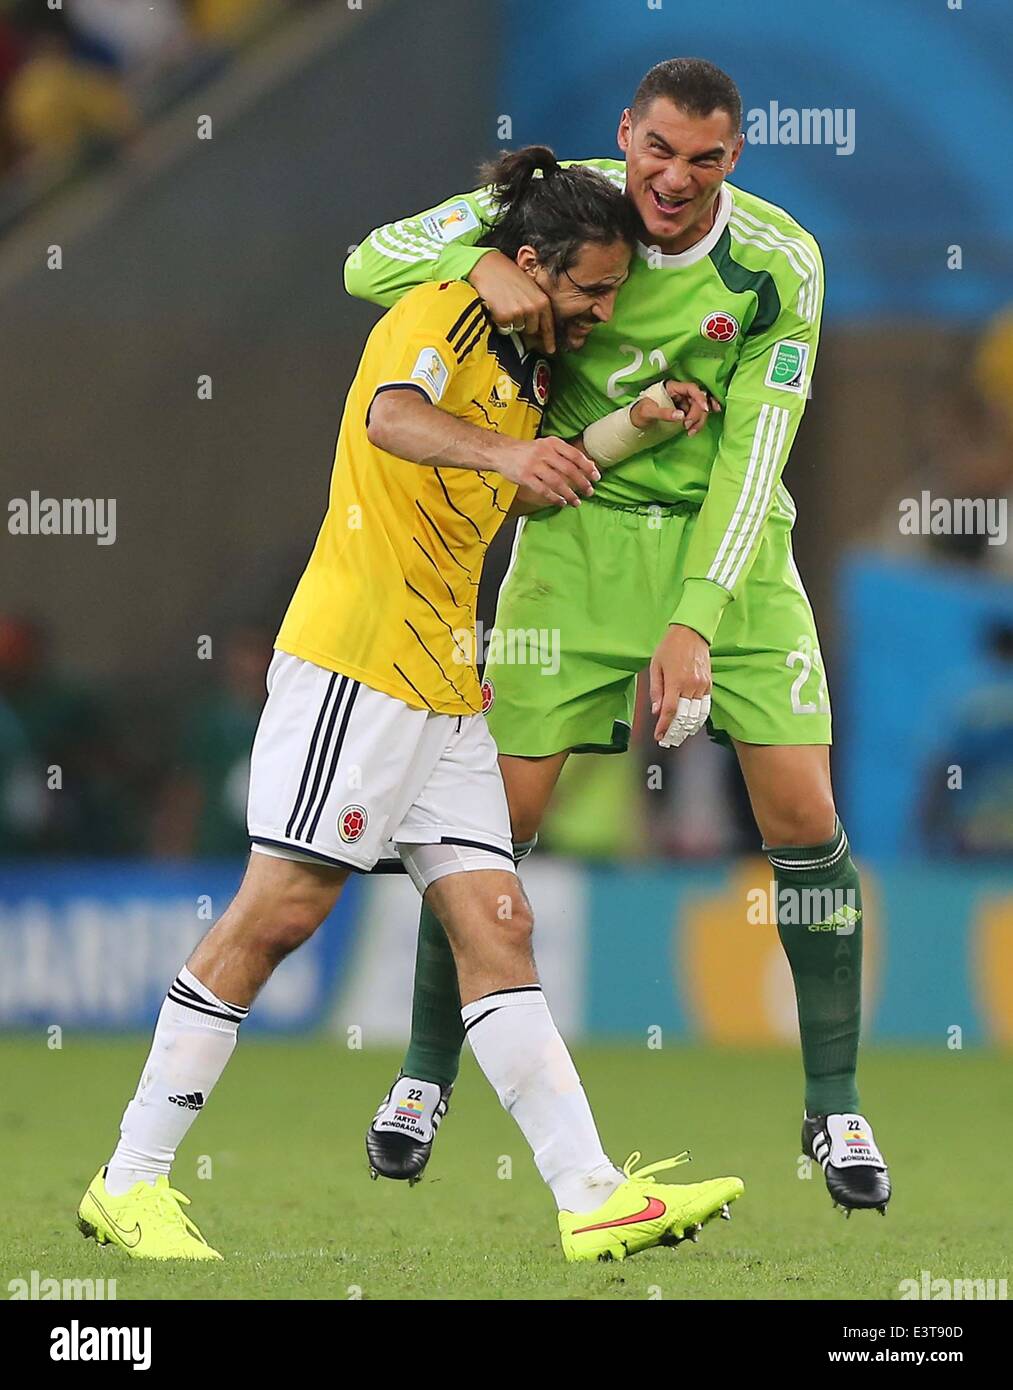 Rio De Janeiro, Brazil. 28th June, 2014. Colombia's goalkeeper Faryd Mondragon (R) and Mario Yepes celebrate the victory after a Round of 16 match between Colombia and Uruguay of 2014 FIFA World Cup at the Estadio do Maracana Stadium in Rio de Janeiro, Brazil, on June 28, 2014. Colombia won 2-0 over Uruguay on Saturday. Credit:  Xu Zijian/Xinhua/Alamy Live News Stock Photo